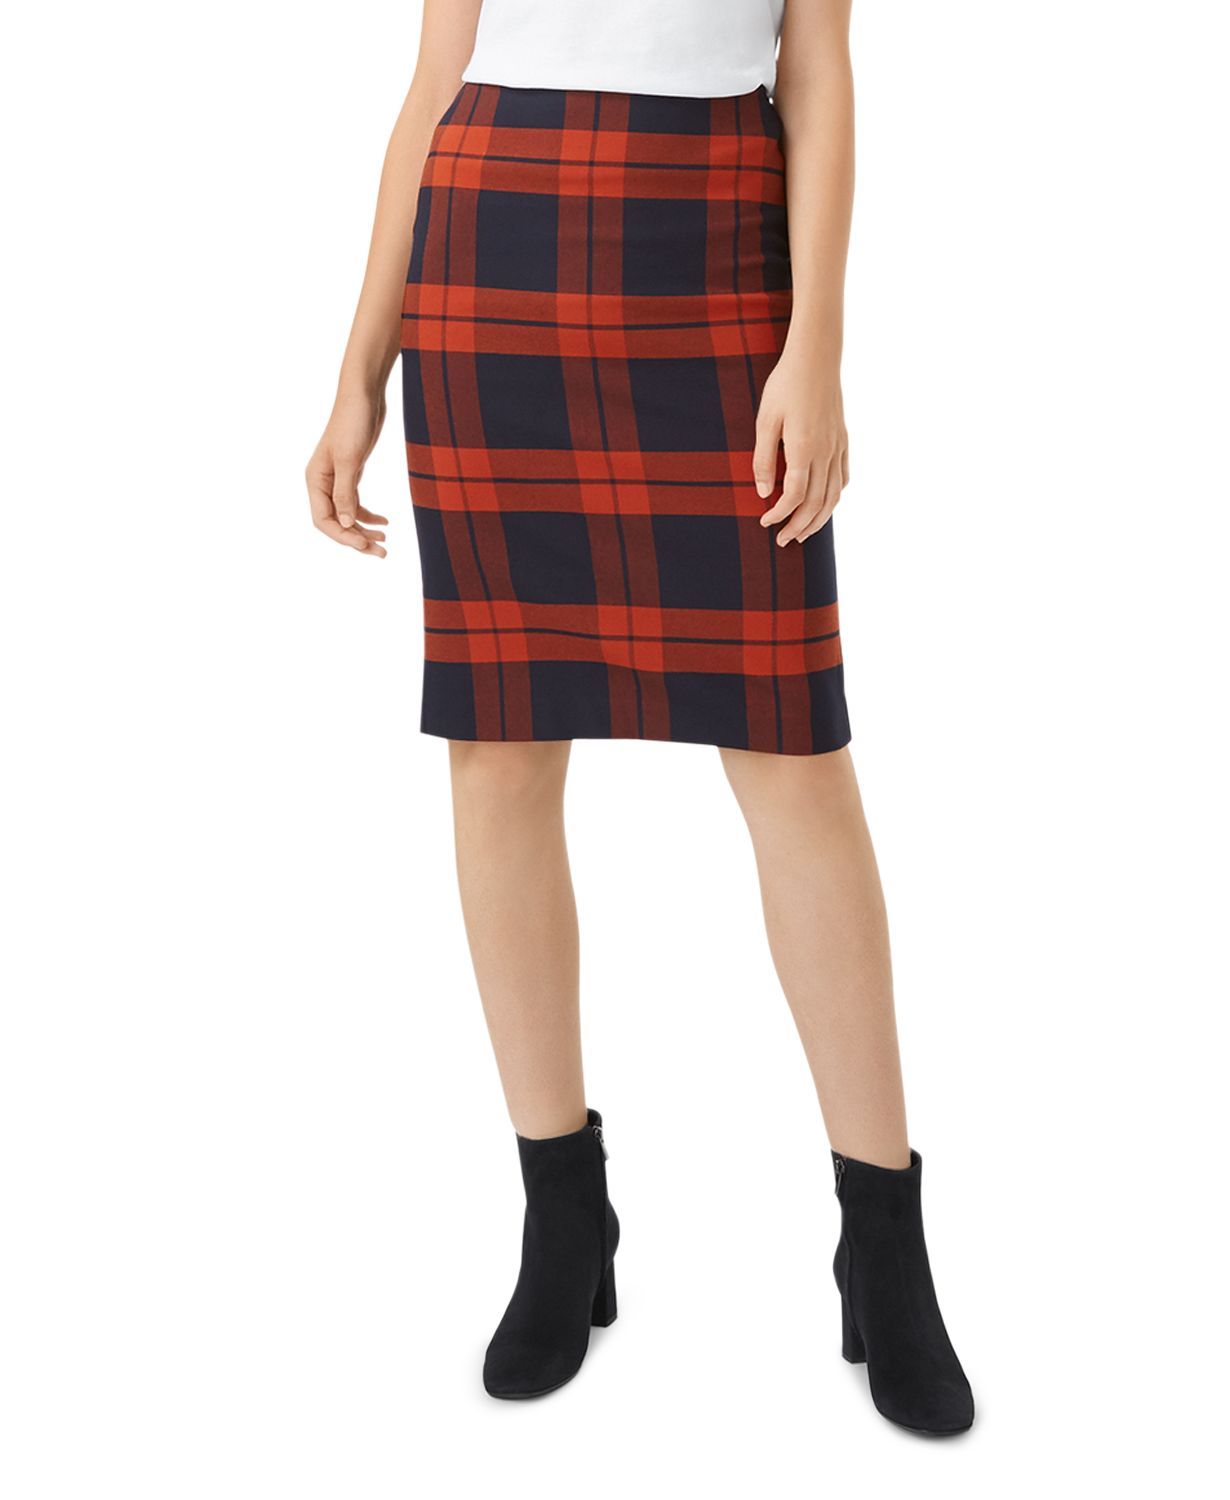 plaid skirt and boots